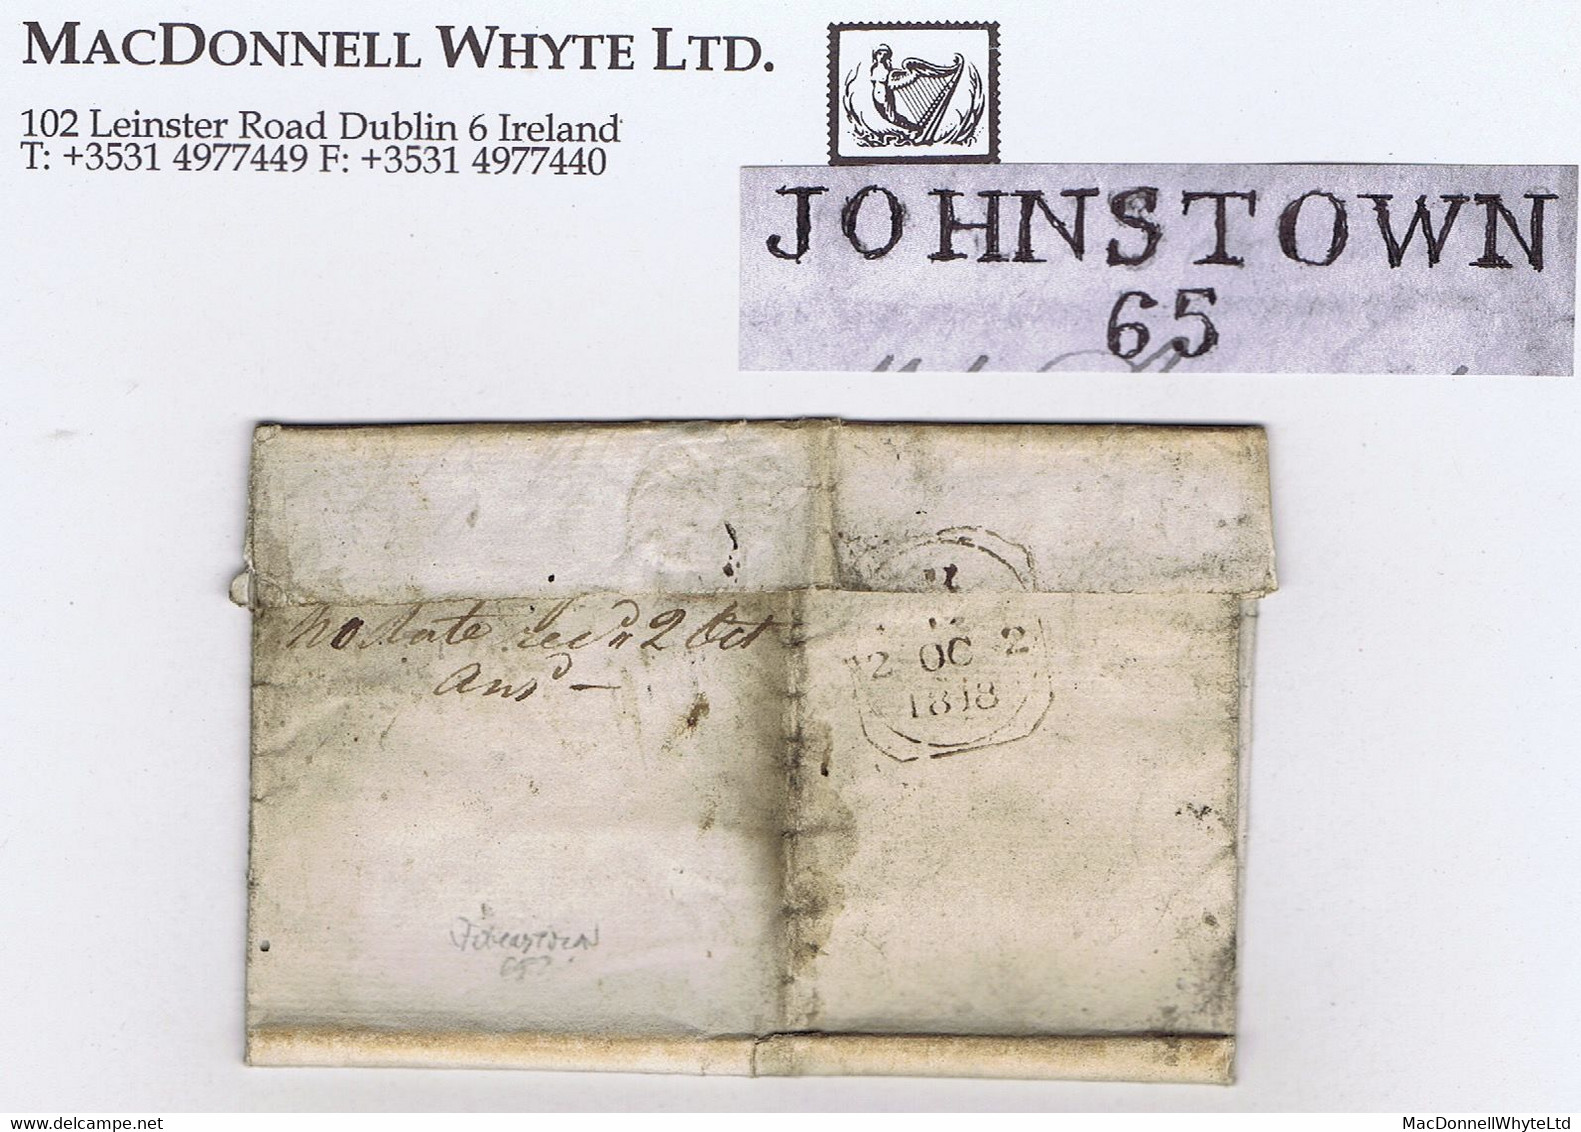 Ireland Kilkenny 1818 Letter To Dublin JOHNSTOWN/65 (or 63) Town Mileage, Black Inspector's Crown Ove Rerate - Prephilately